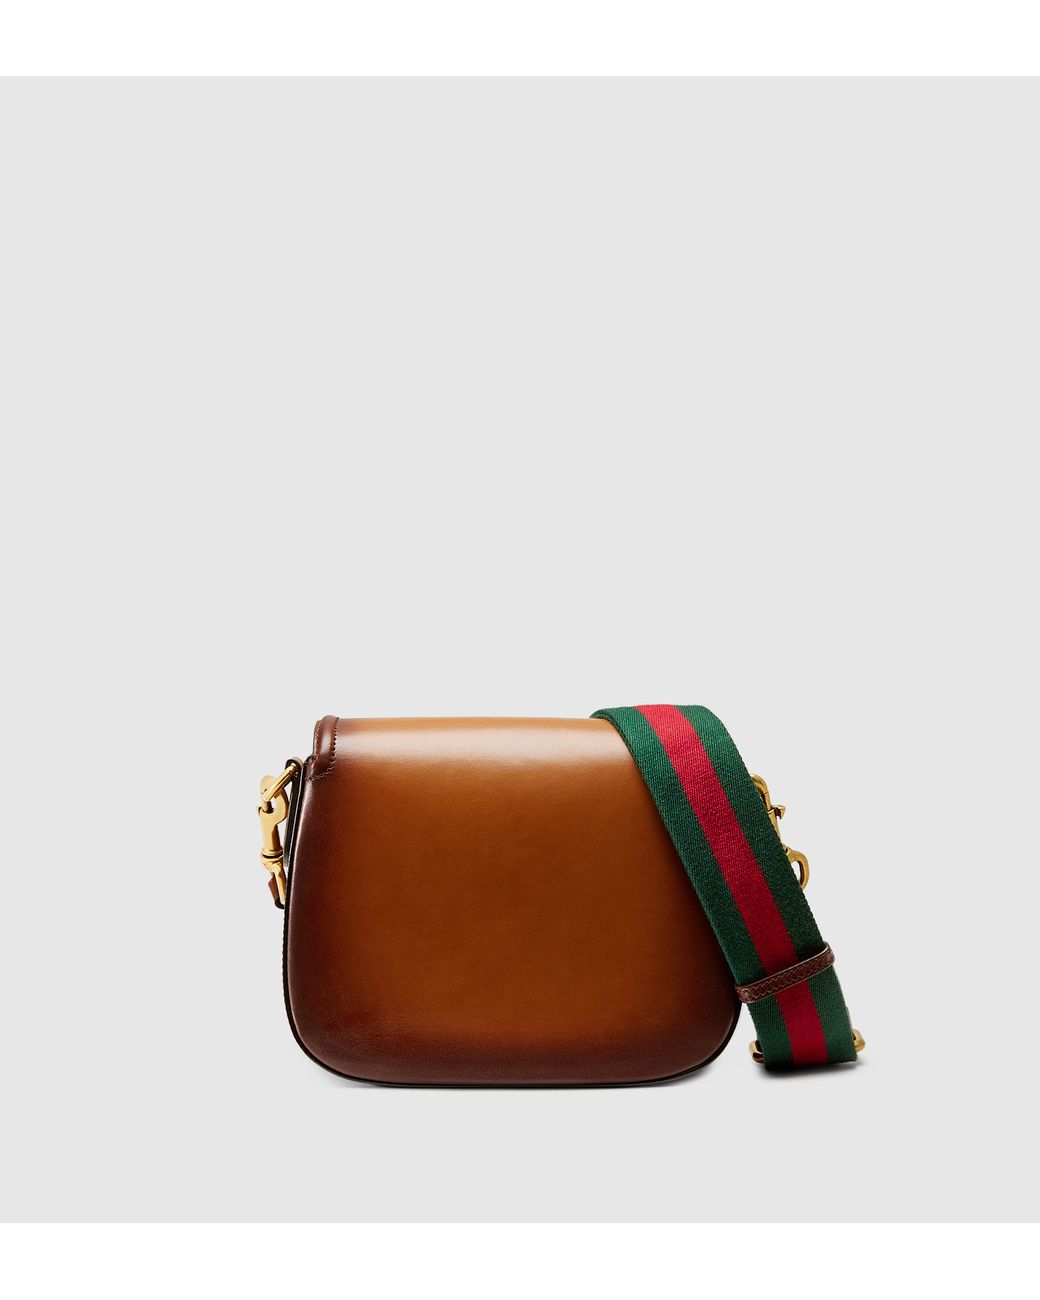 Gucci Lady Web Hand-stained Leather Shoulder Bag in Brown | Lyst